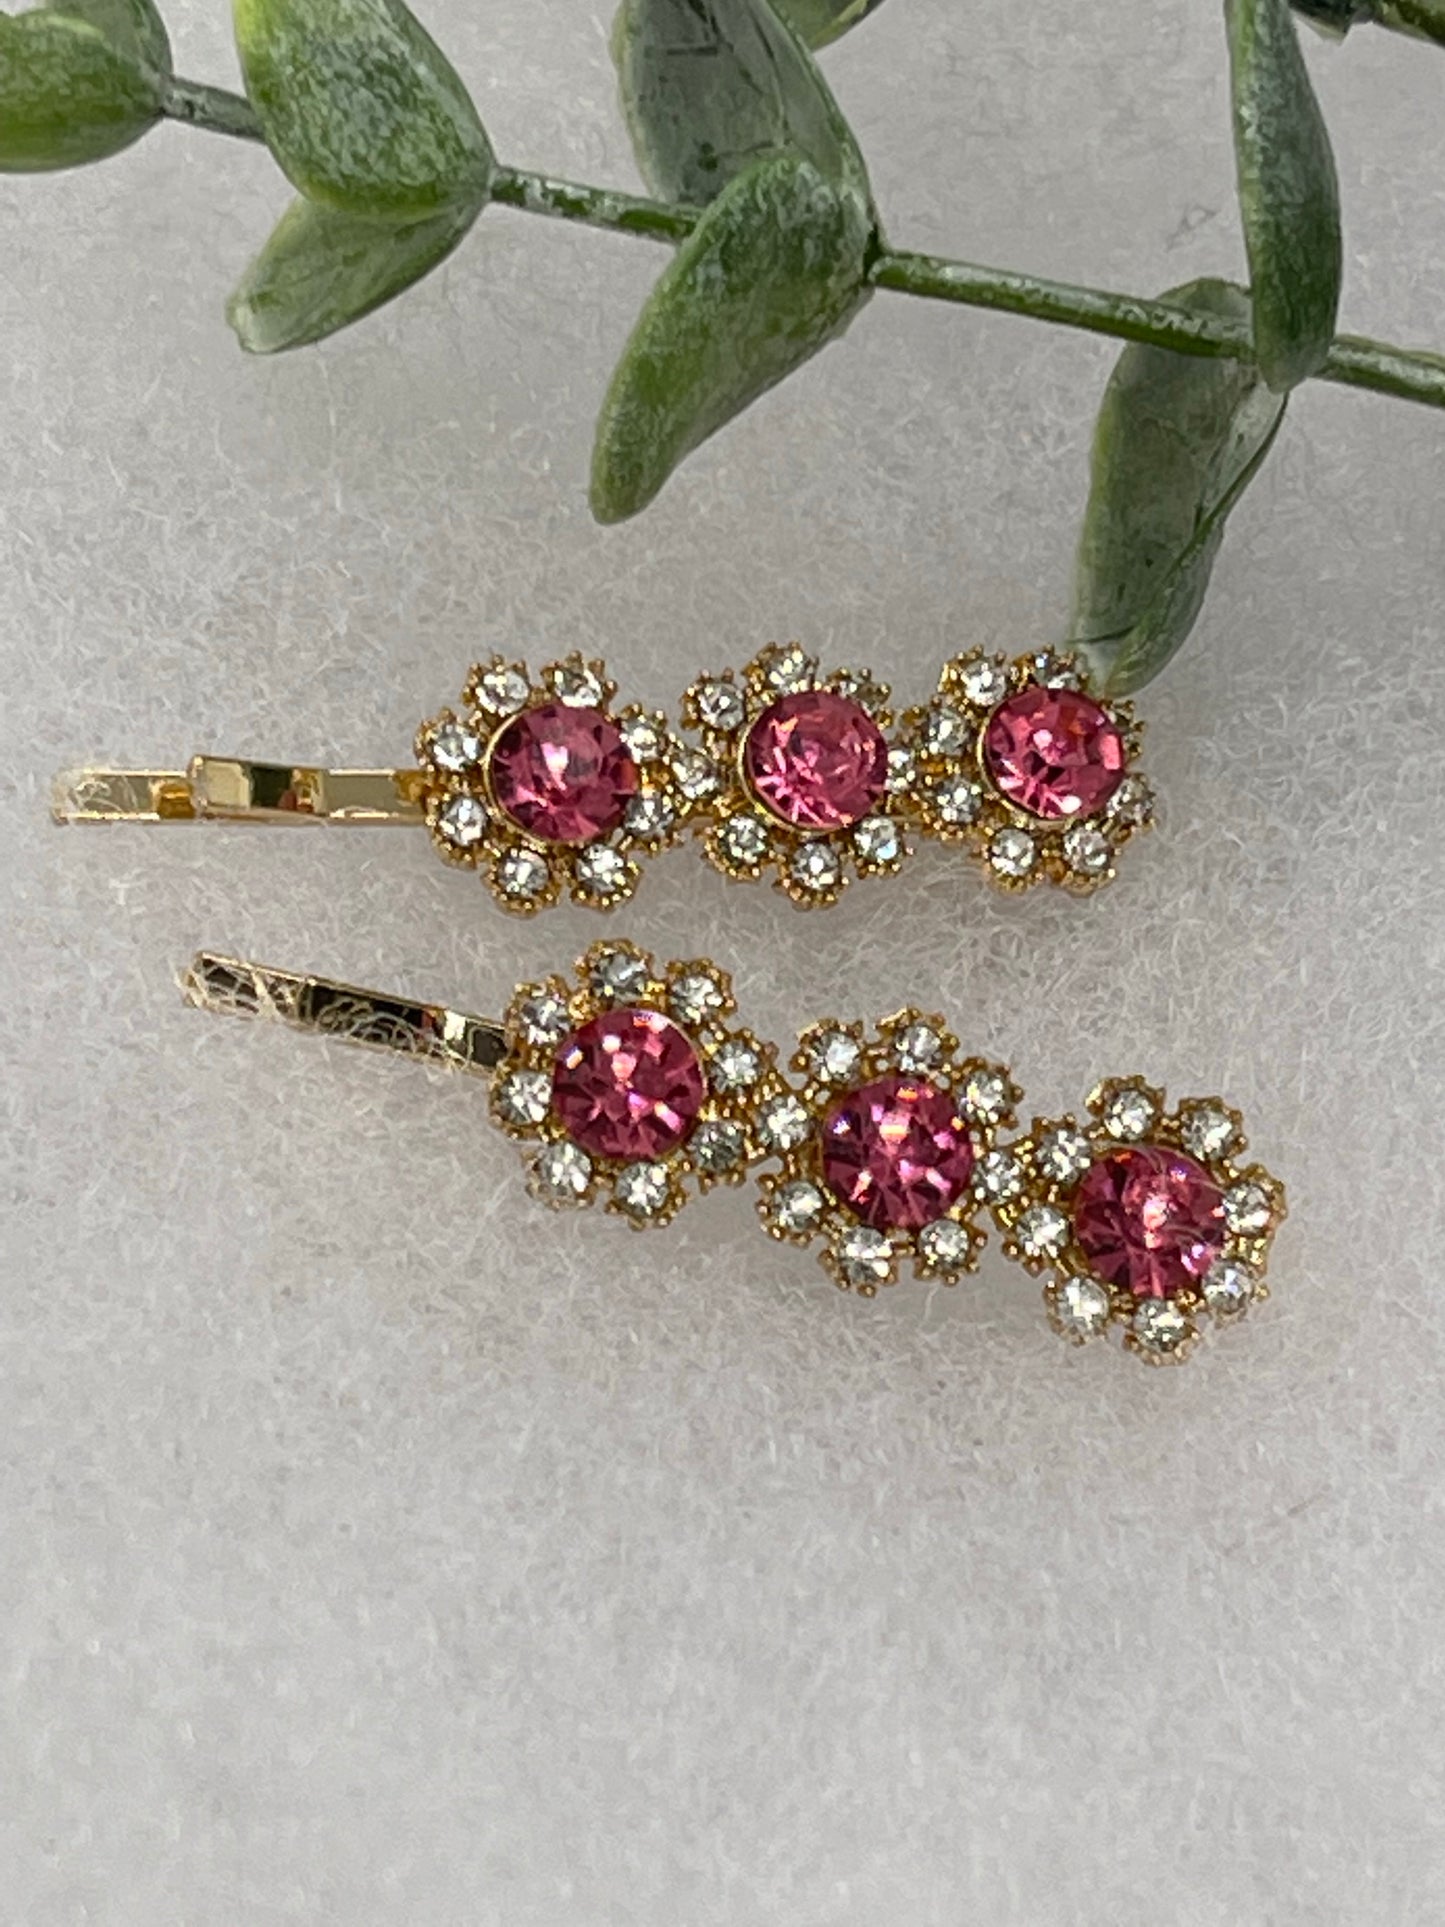 Pink crystal rhinestone approximately 2.0” gold tone hair pins 2 pc set wedding bridal shower engagement formal princess accessory accessories